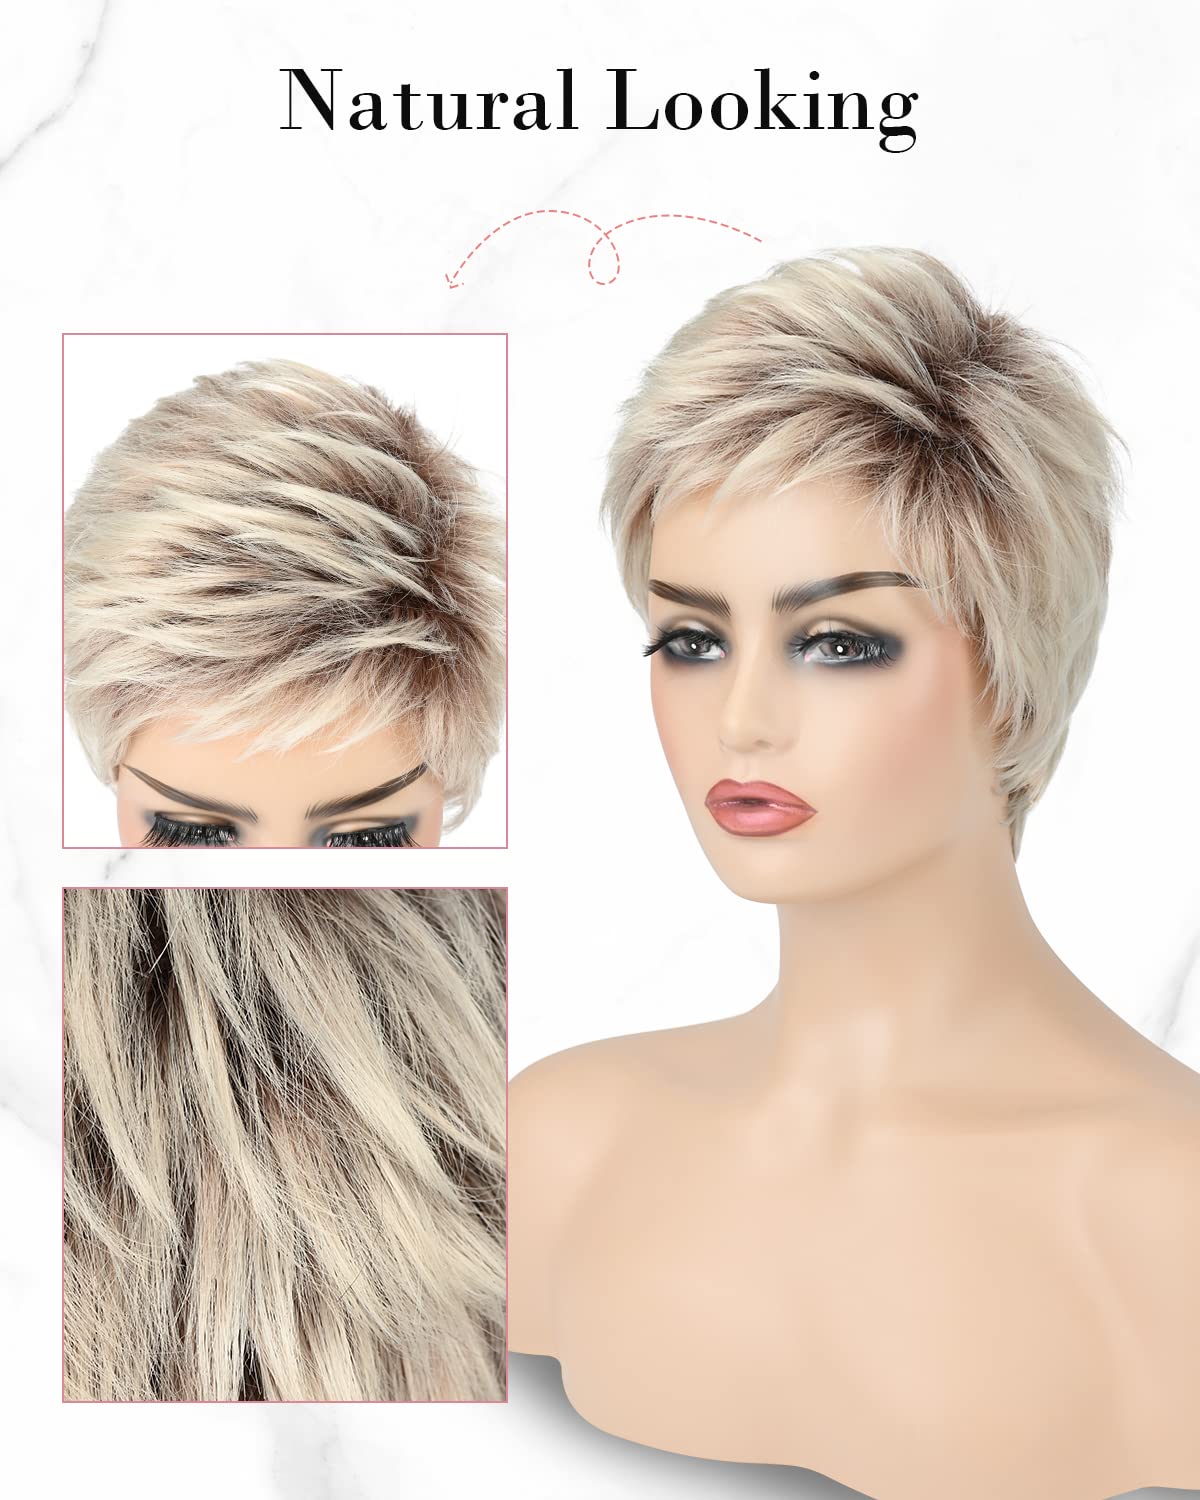 REECHO Pixie Cut Wigs for White Women, Short Wigs with Bangs layered hairstyles for Unisex Adult